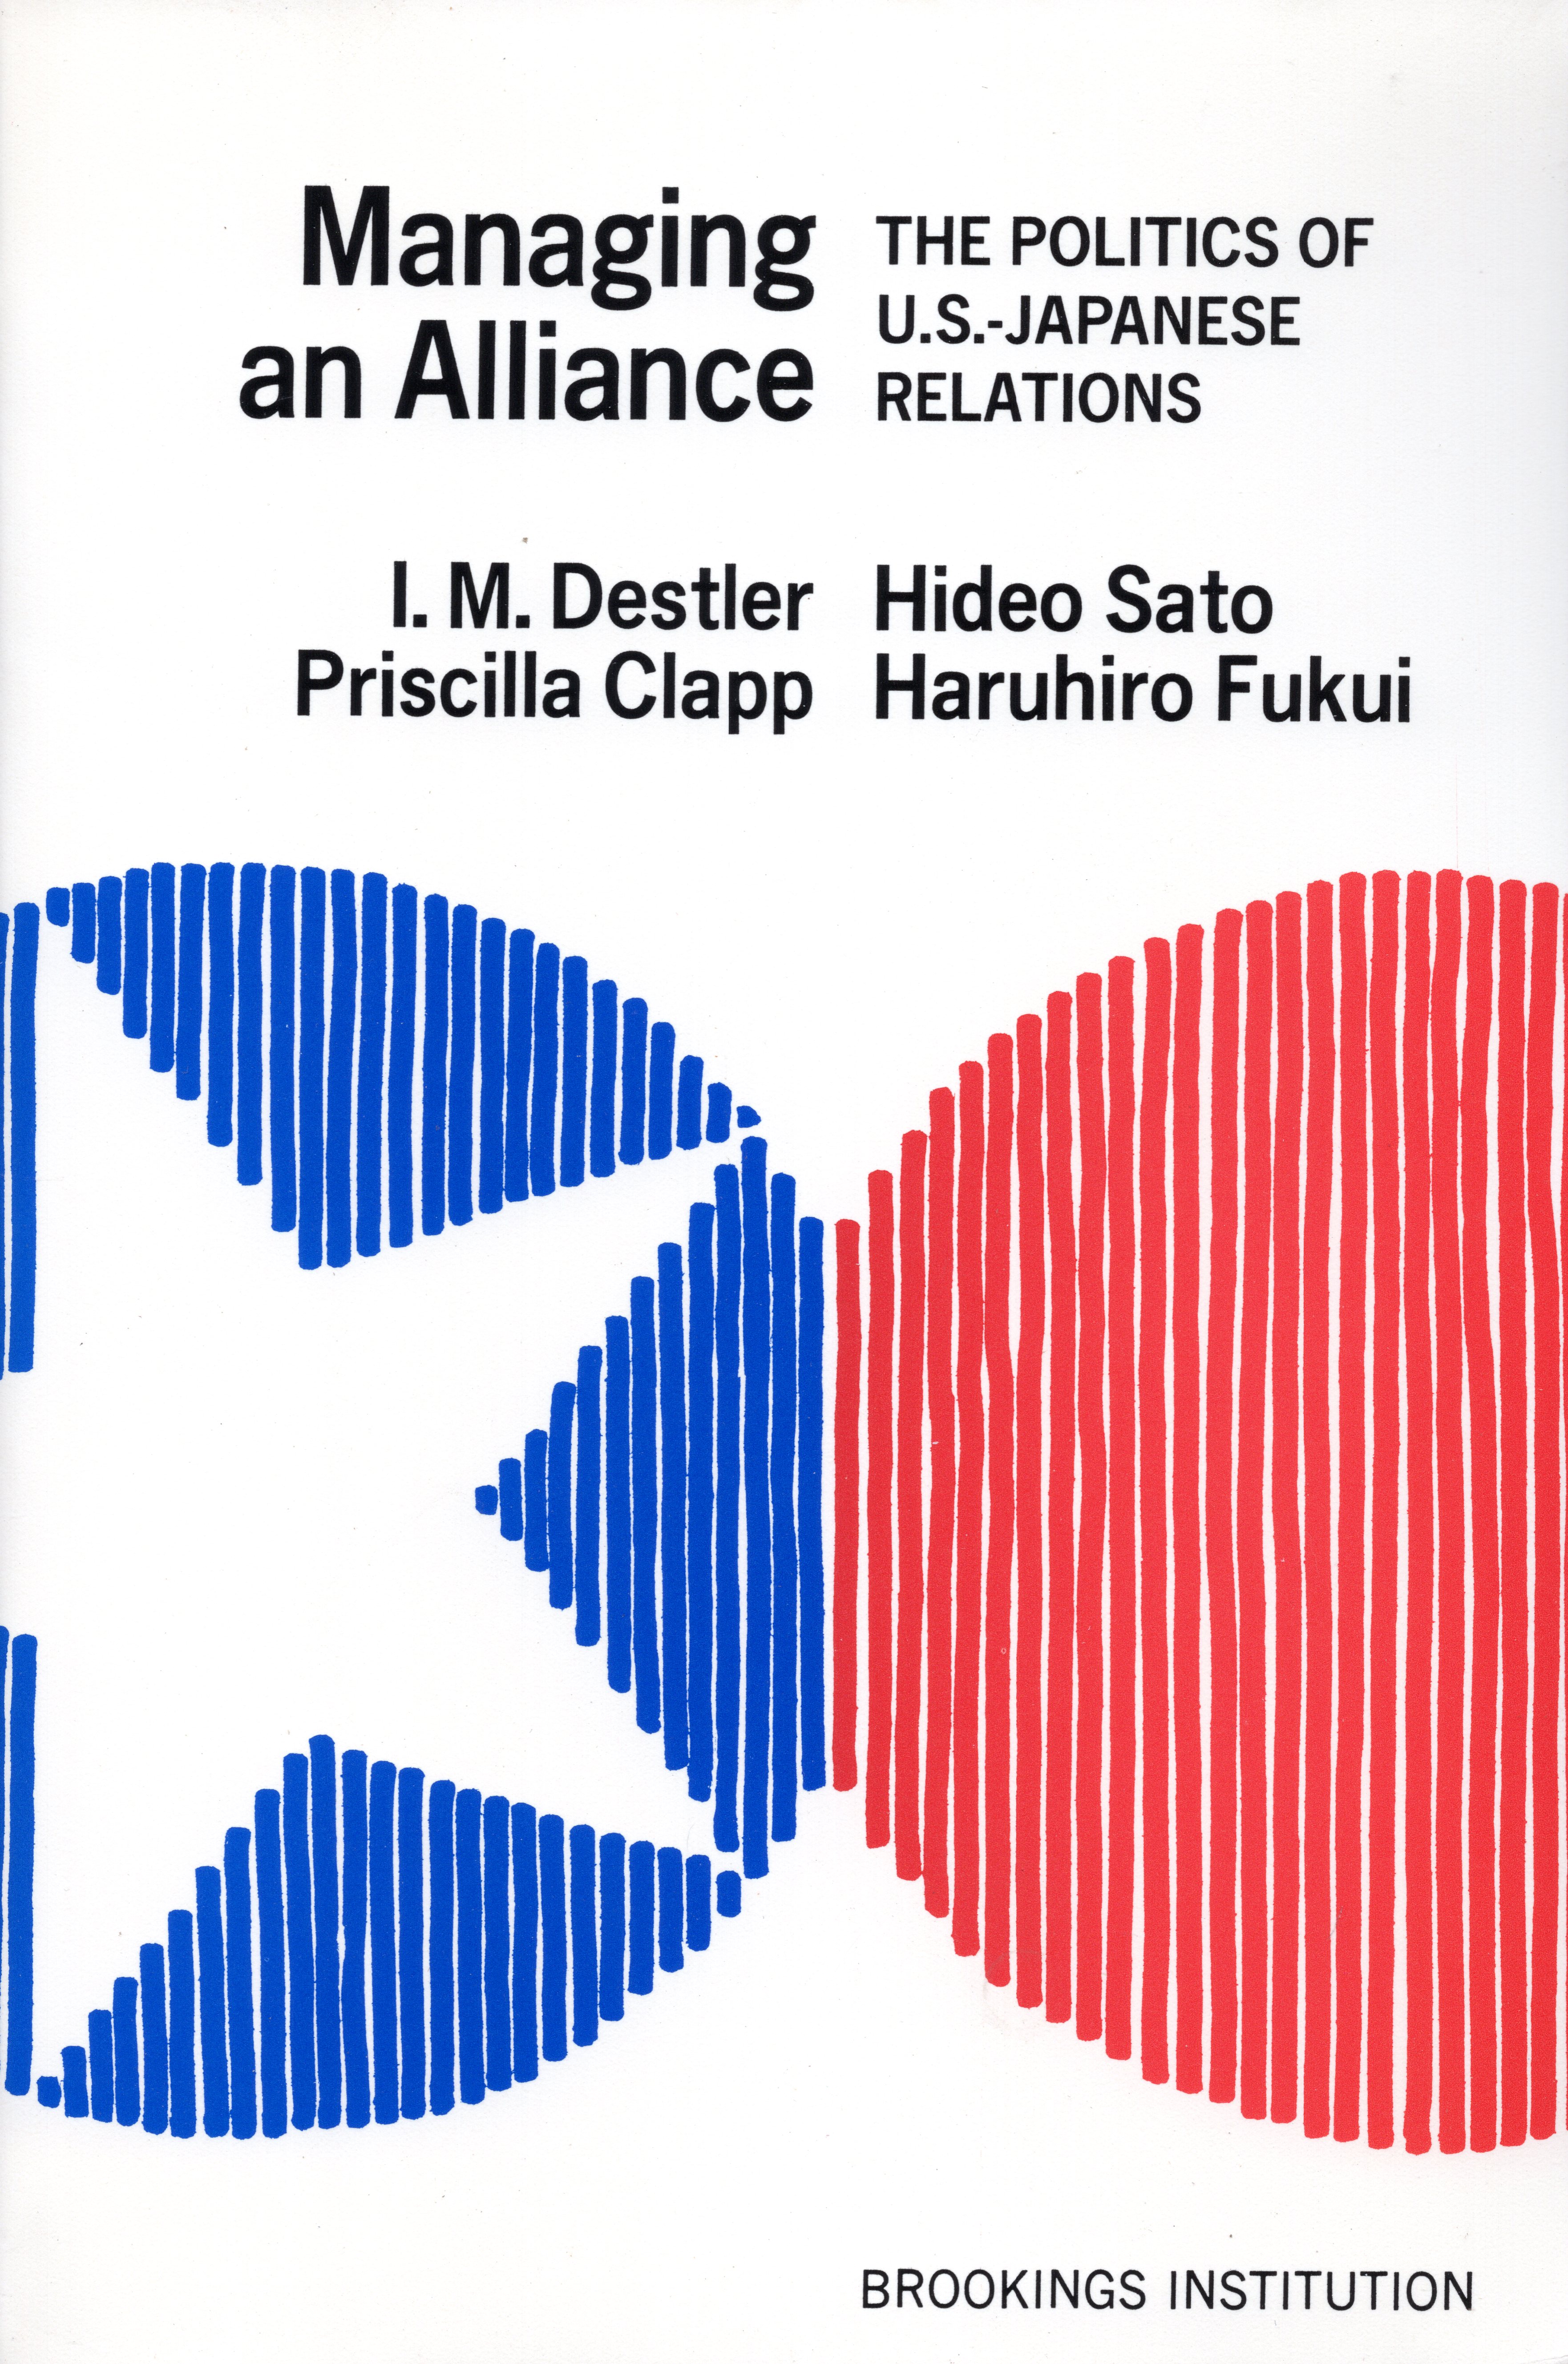 Managing an Alliance: The Politics of U.S.-Japanese Relations